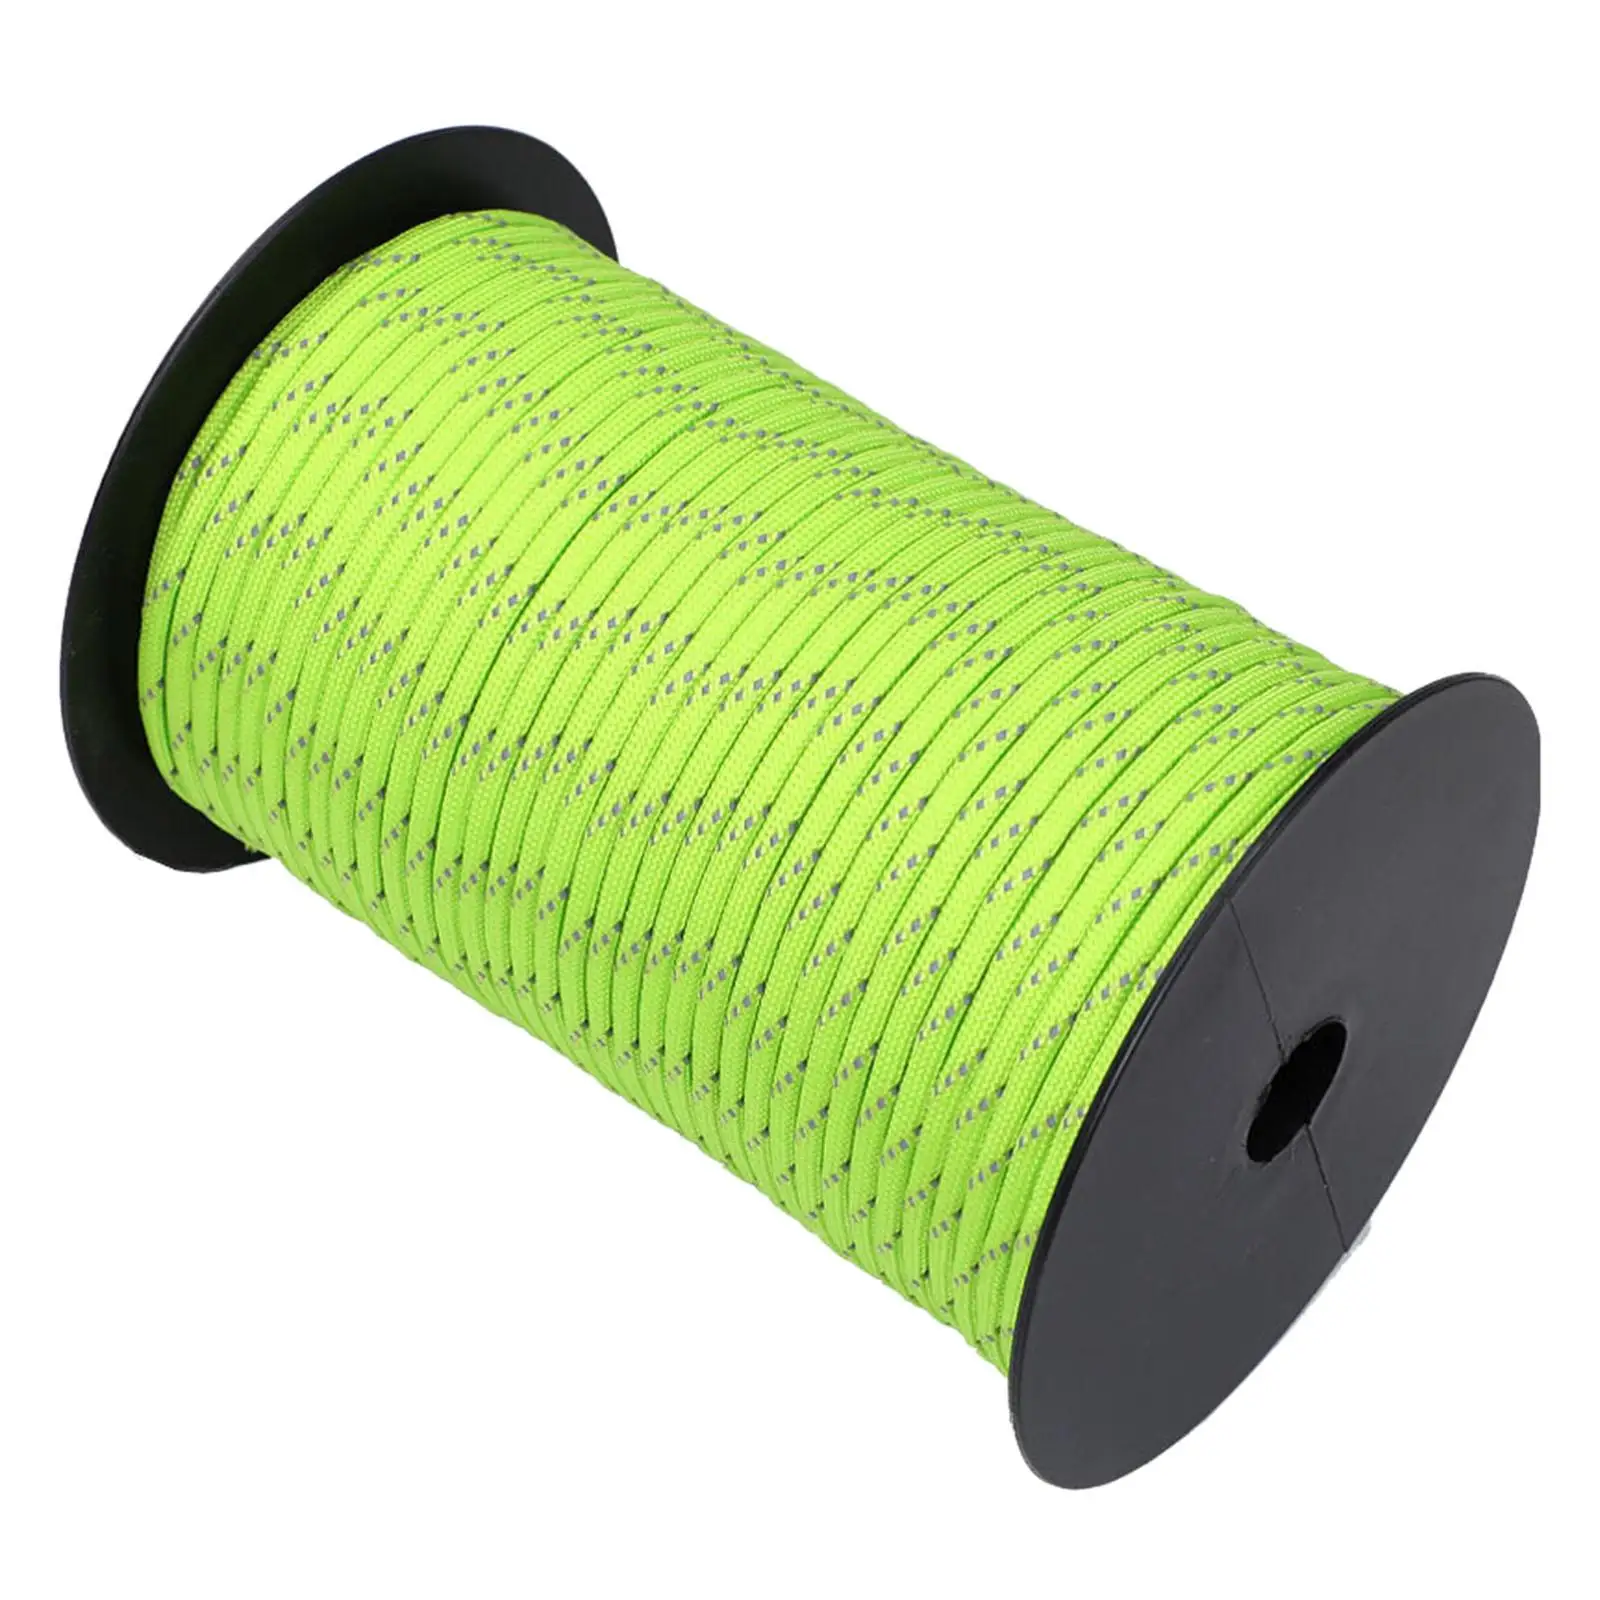 100M Reflective 550 Paracord Parachute Cord Tent Rope guyline for Hiking